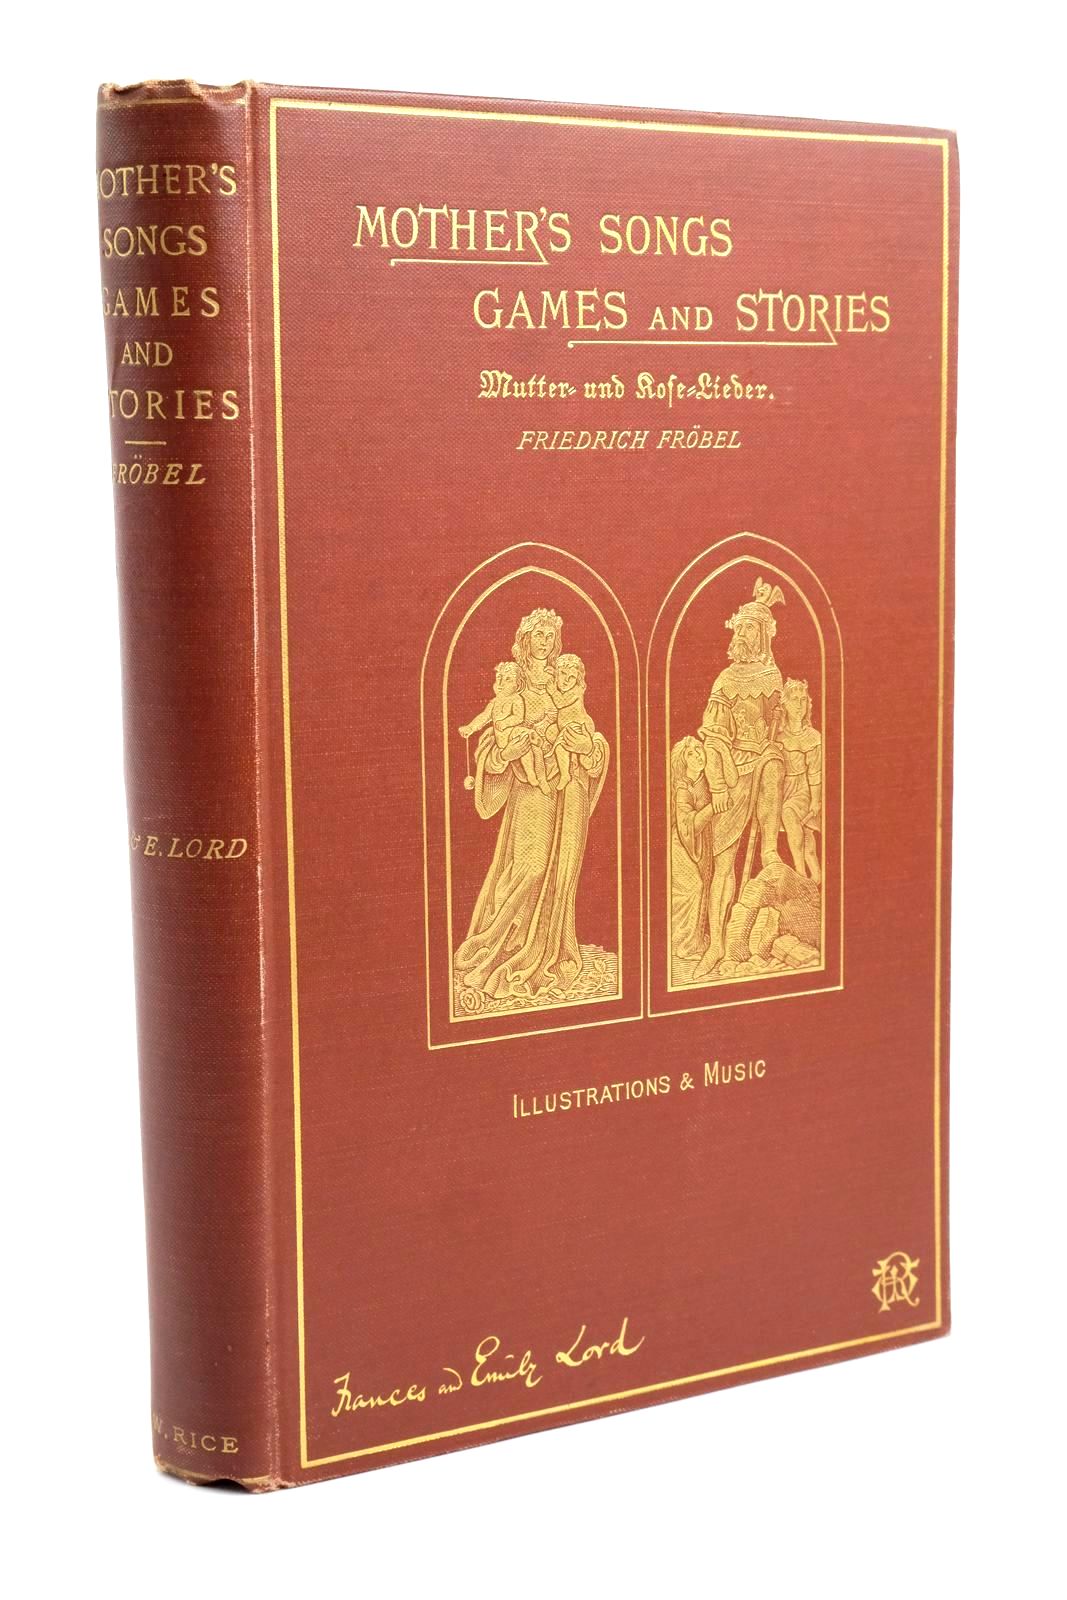 Photo of MOTHER'S SONGS, GAMES AND STORIES written by Frobel, Friedrich Lord, Frances Lord, Emily published by William Rice (STOCK CODE: 1322208)  for sale by Stella & Rose's Books